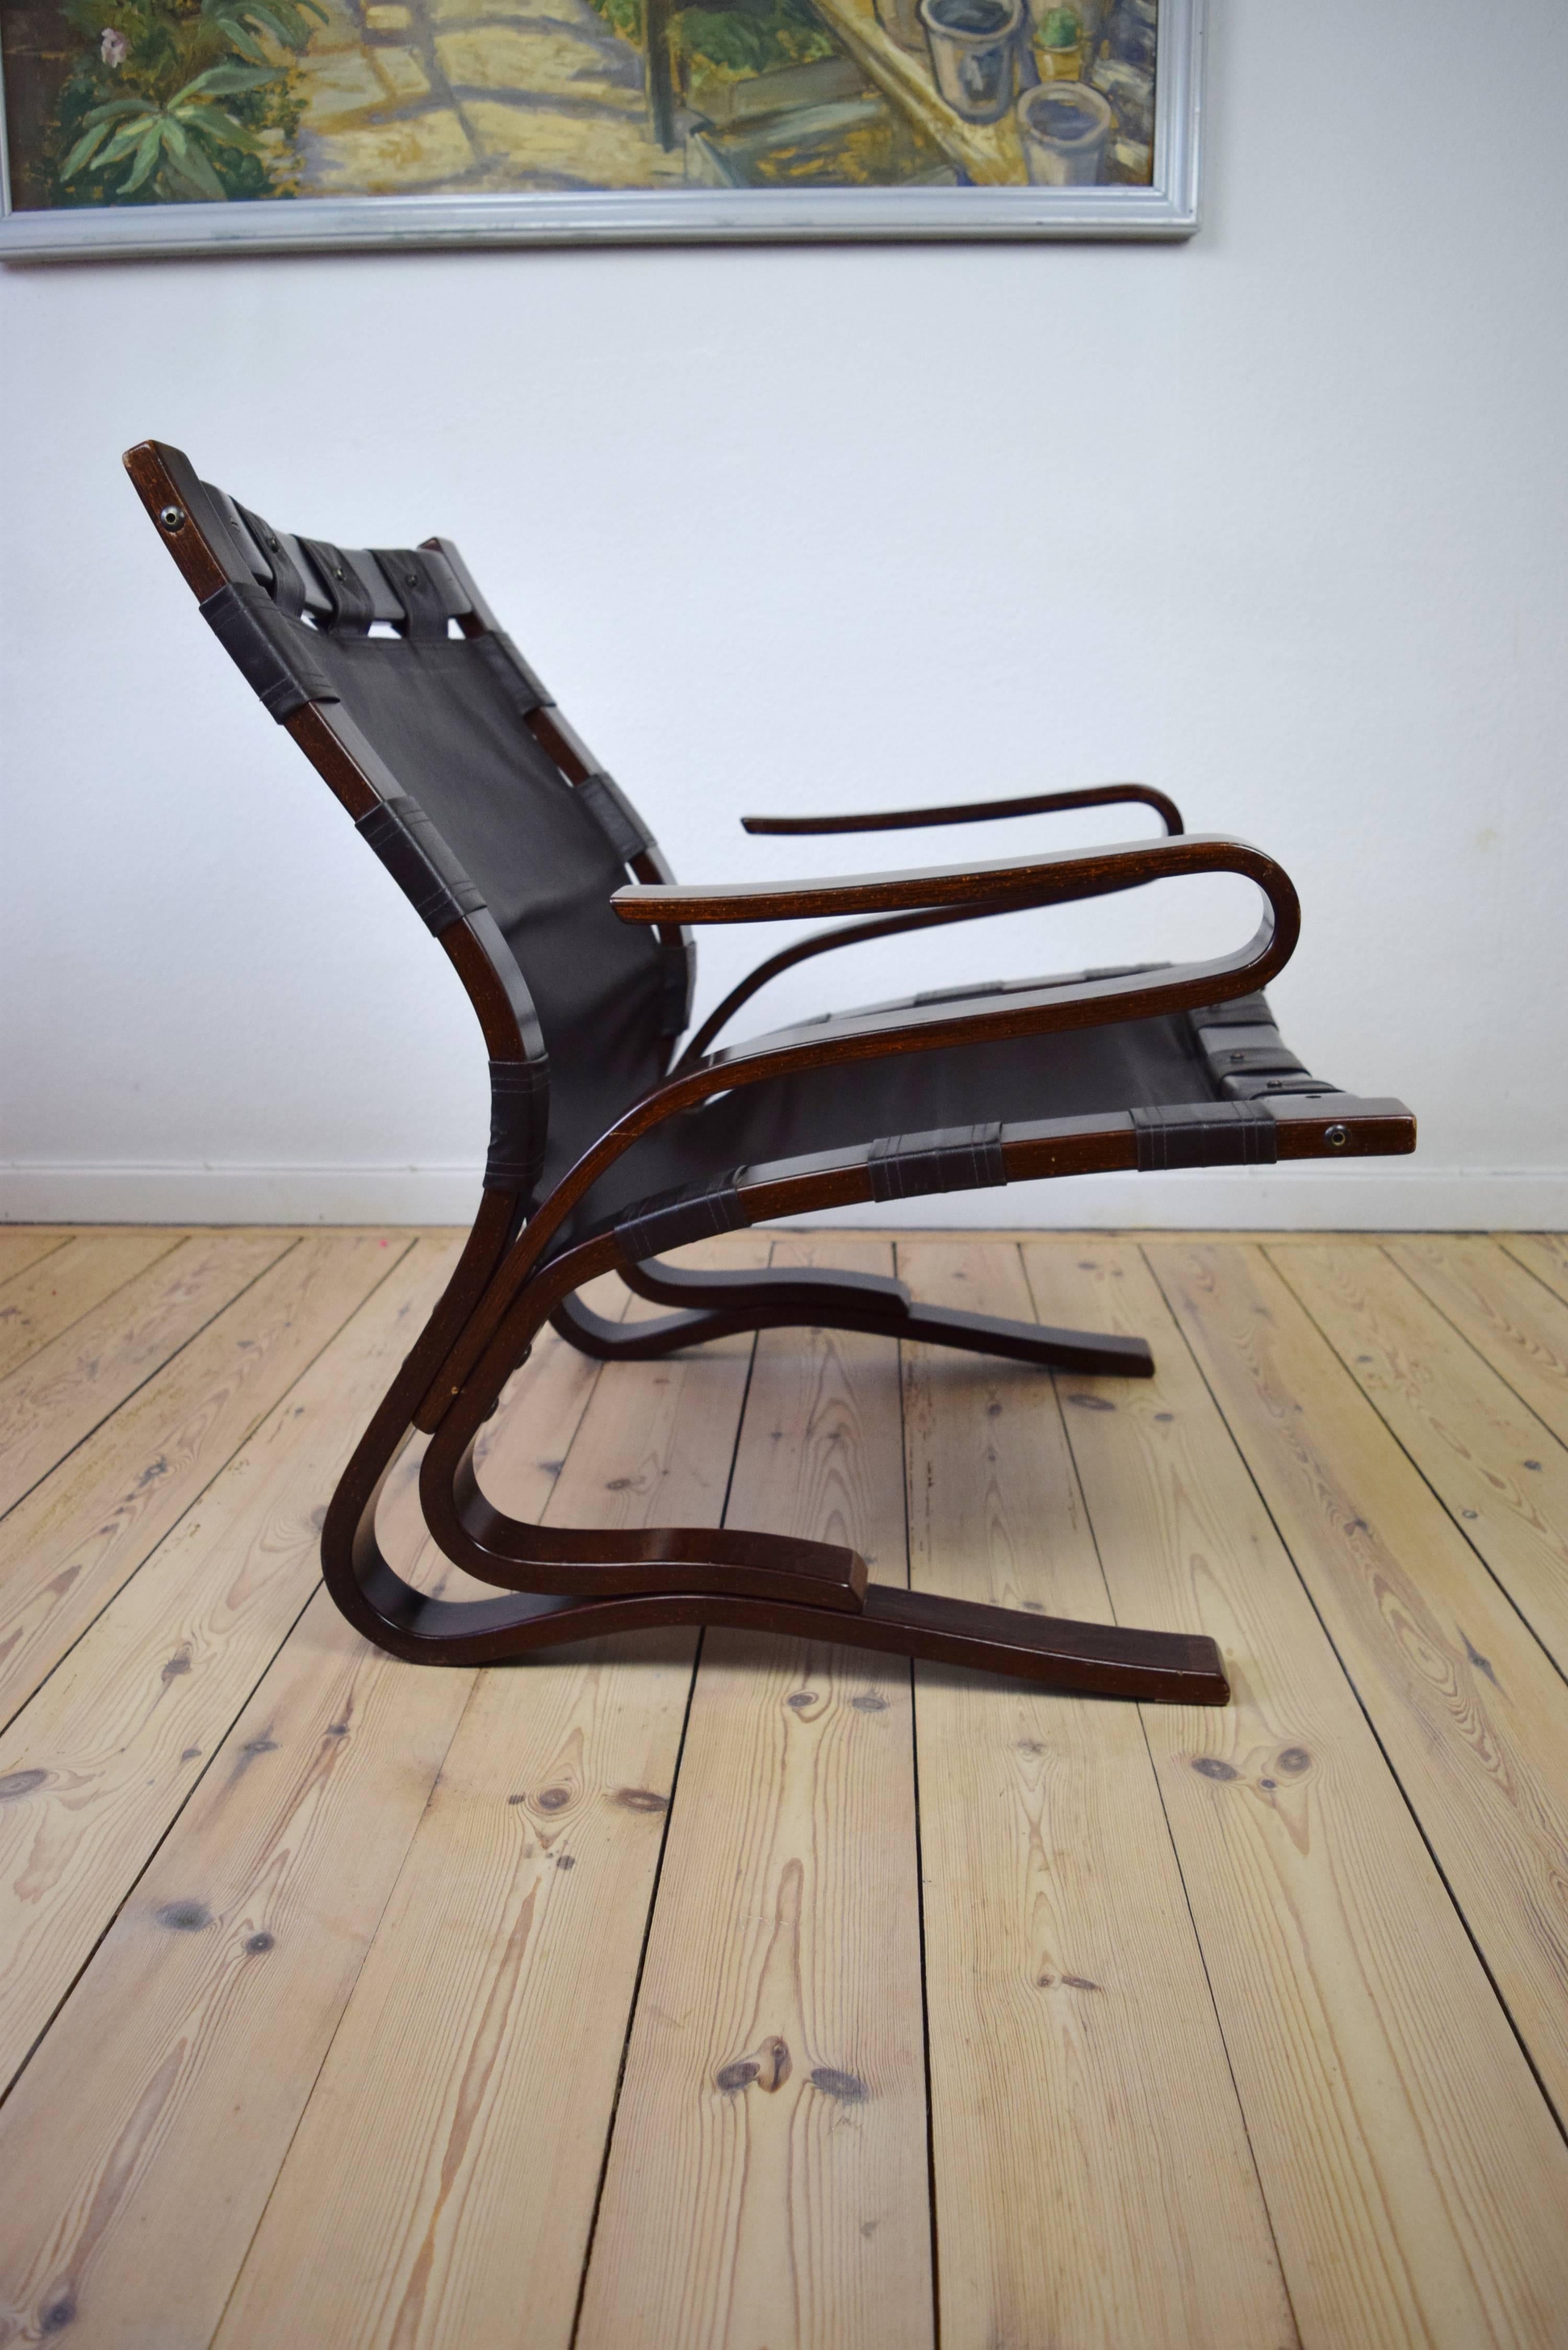 Leather Elsa & Nordahl Solheim Pirate Chairs. 1973